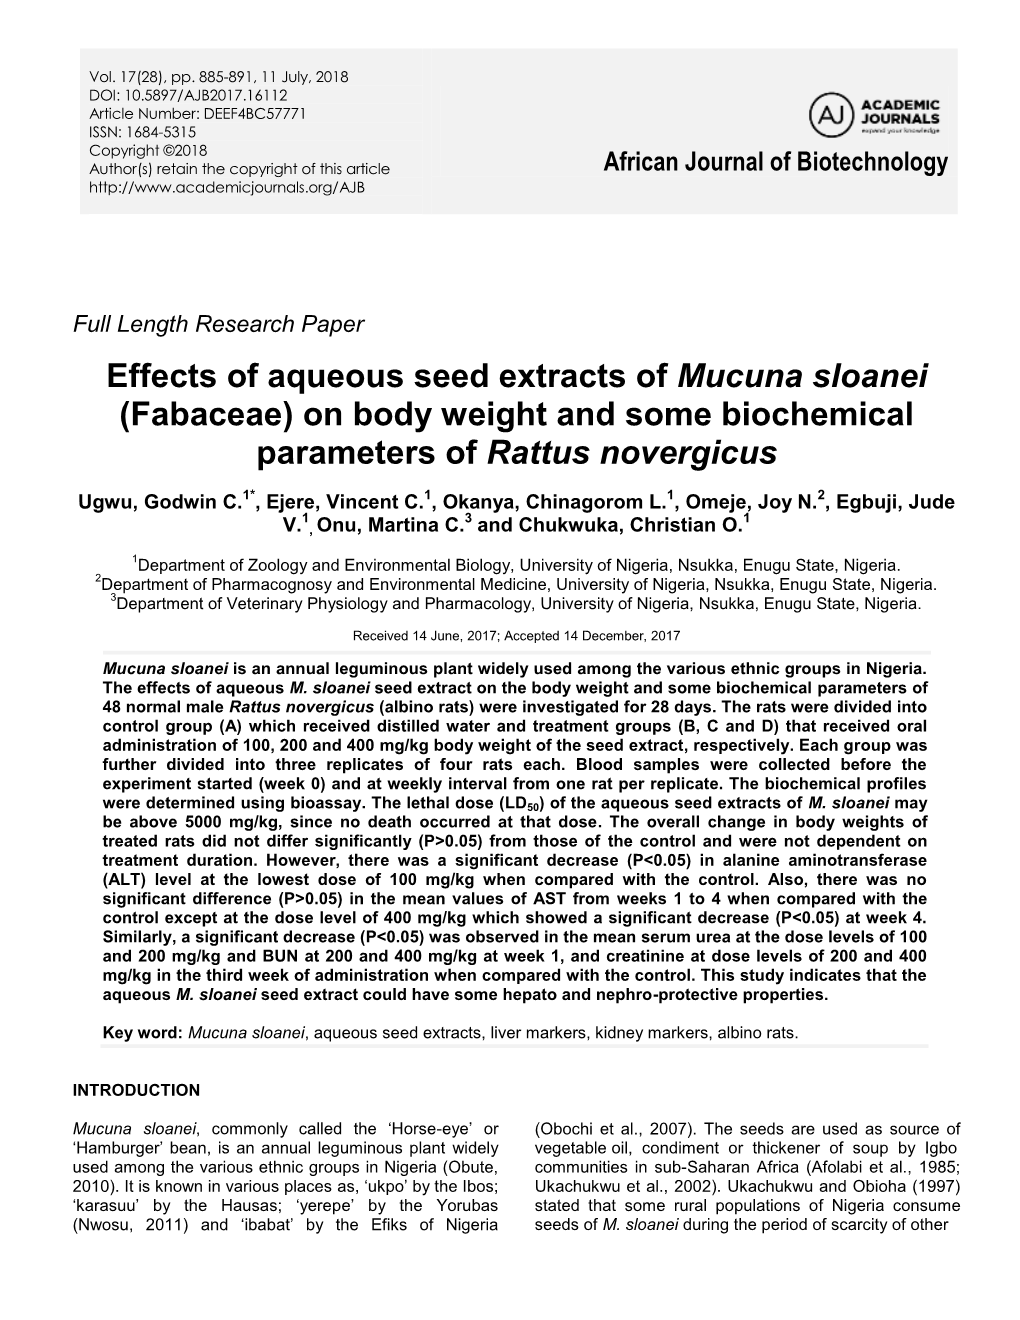 Effects of Aqueous Seed Extracts of Mucuna Sloanei (Fabaceae) on Body Weight and Some Biochemical Parameters of Rattus Novergicus